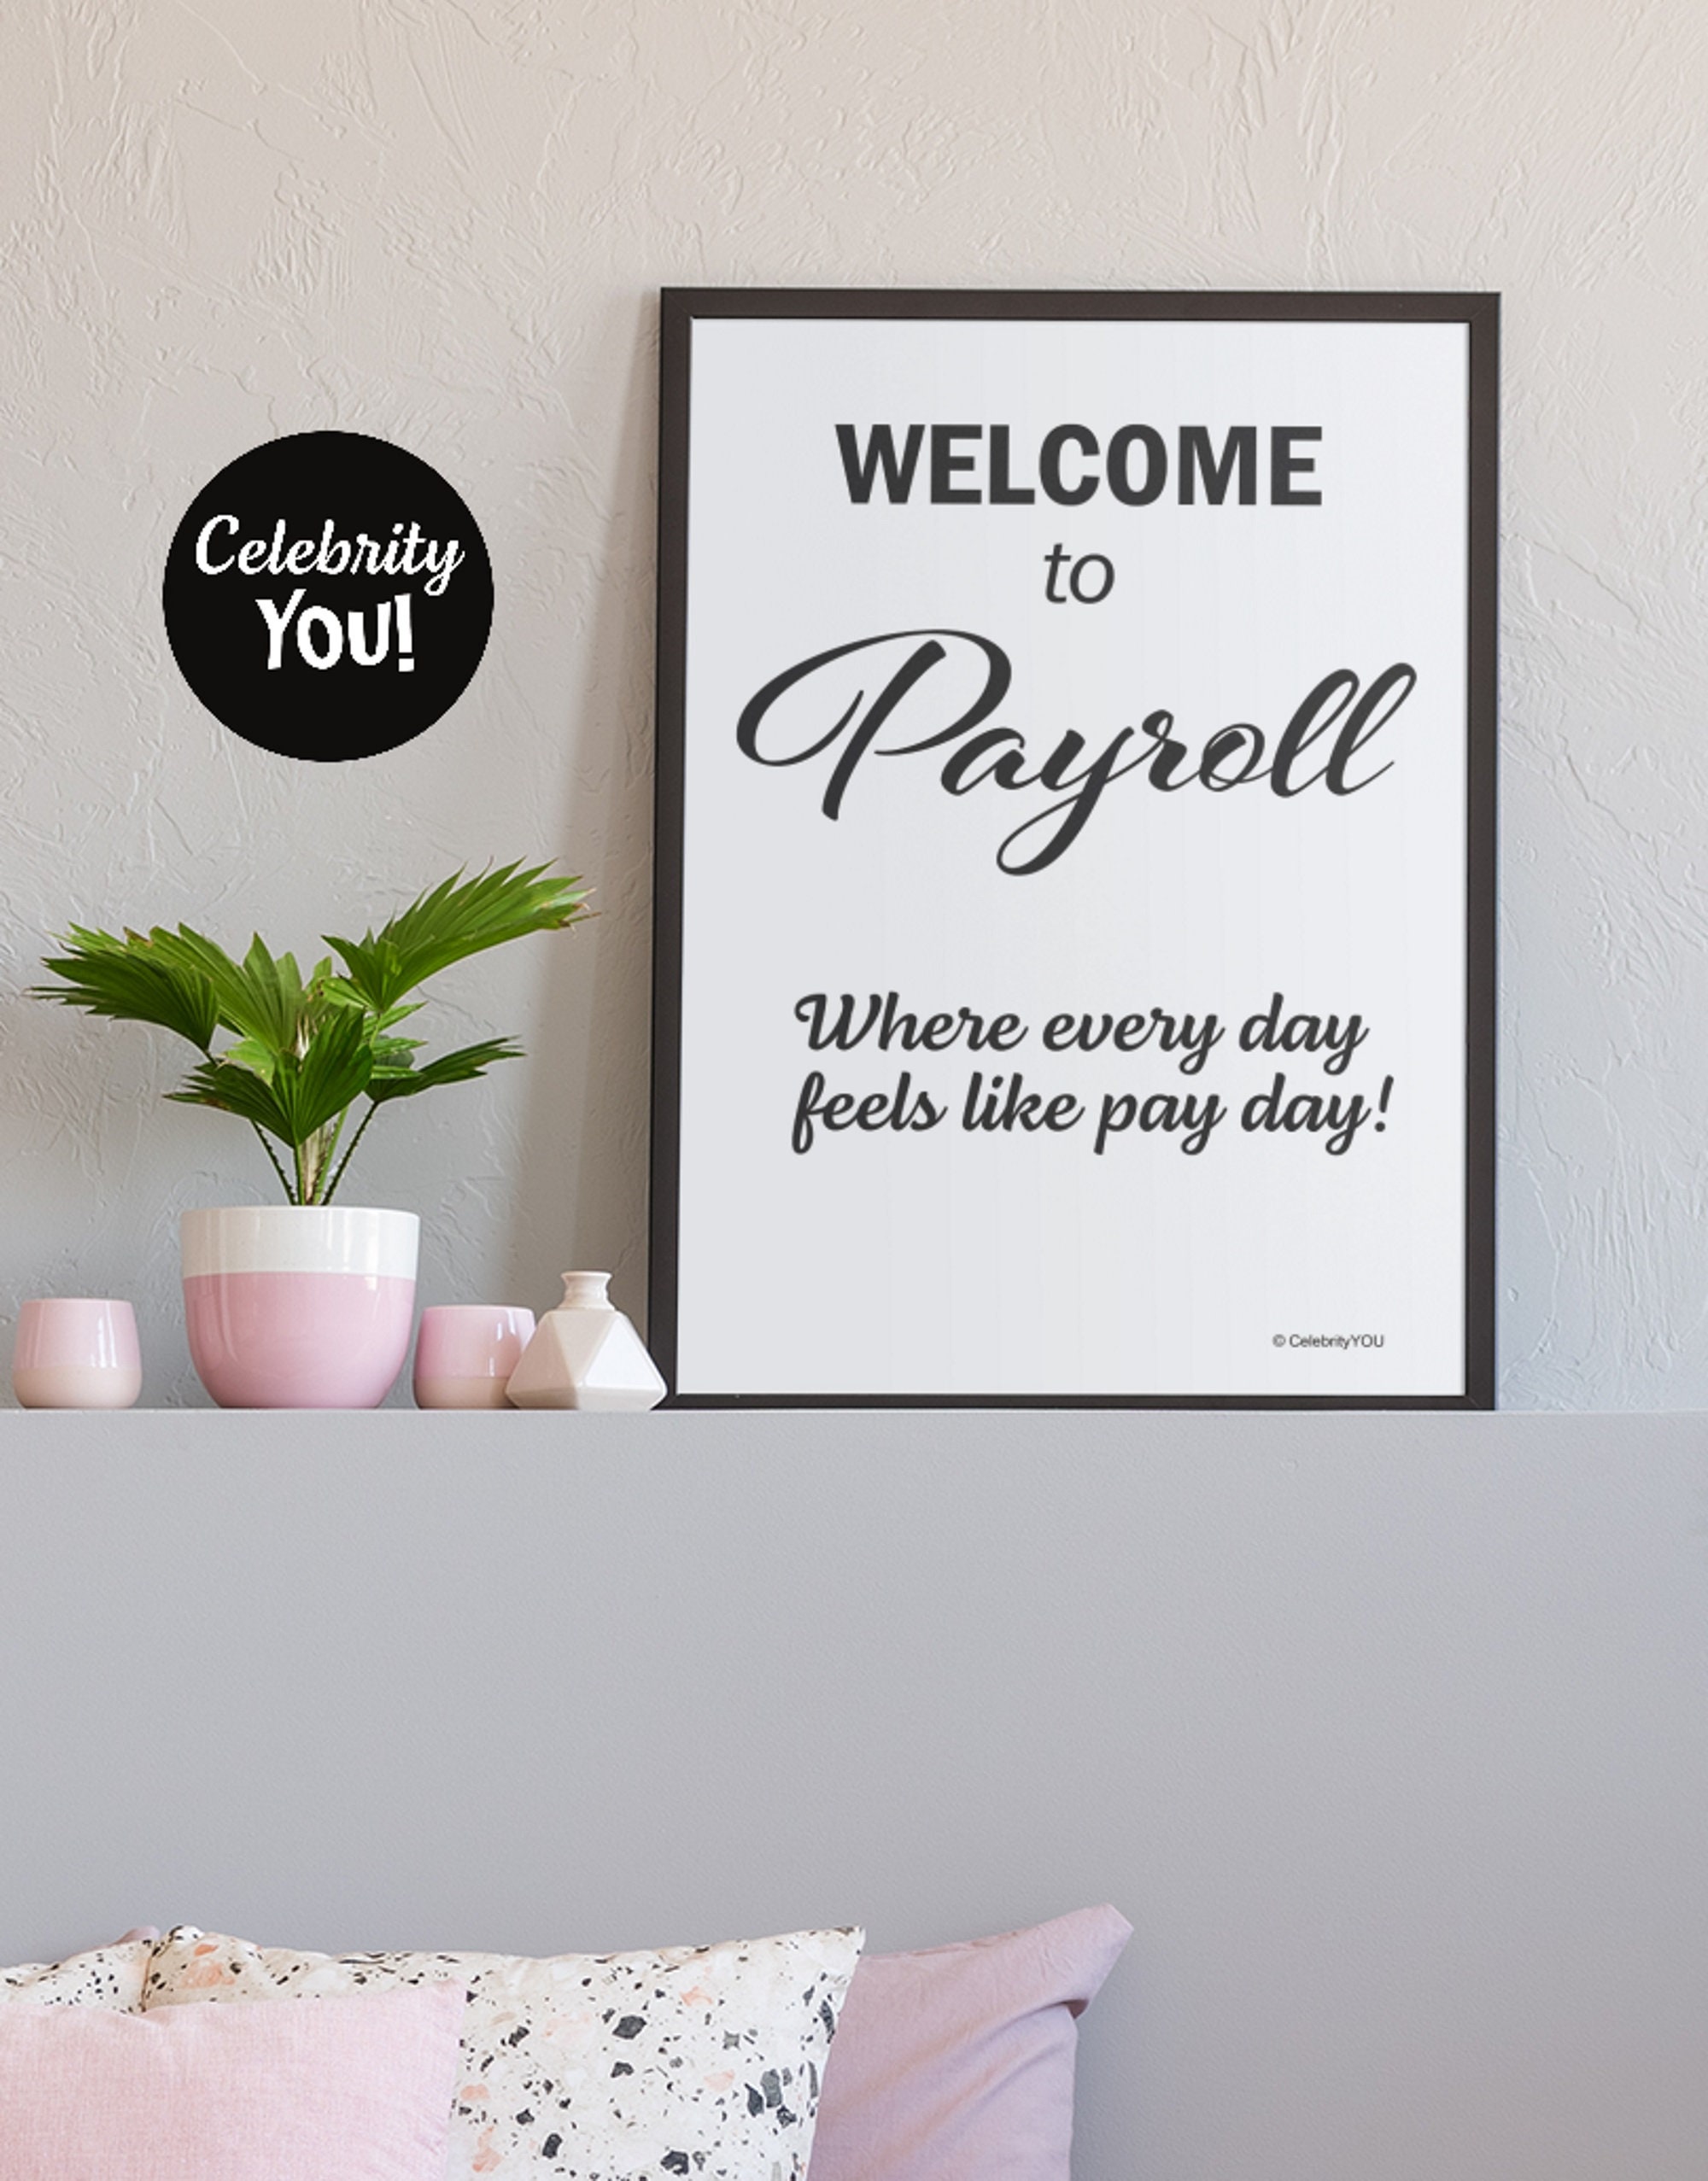 Welcome to National Payroll Week 2019!